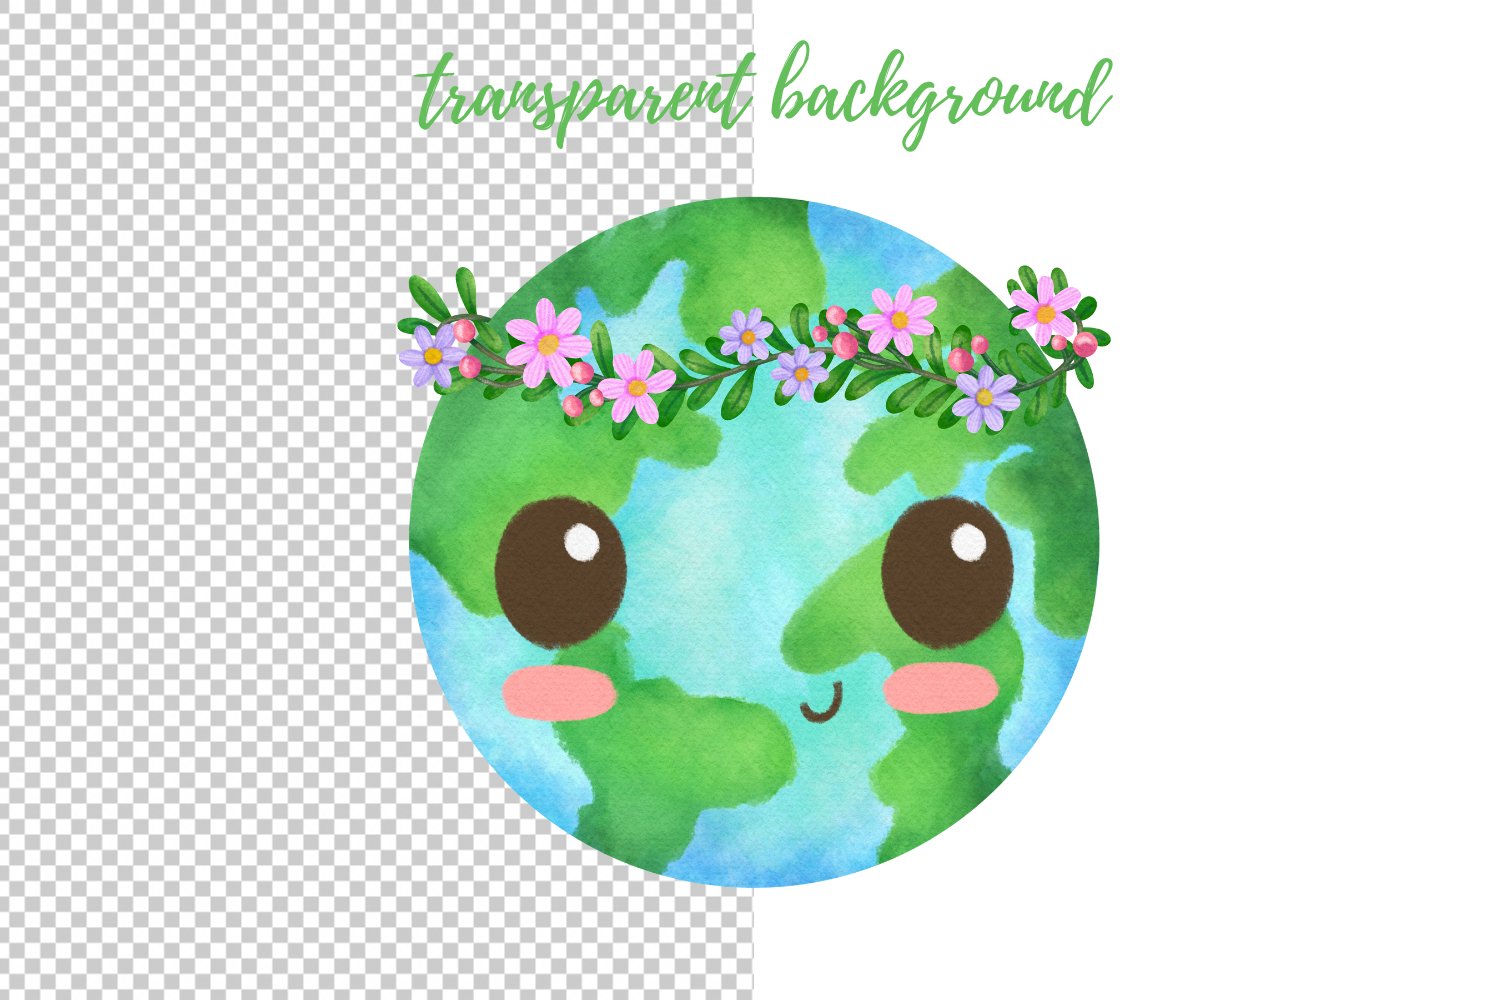 Nice and shy green planet with a wreath.